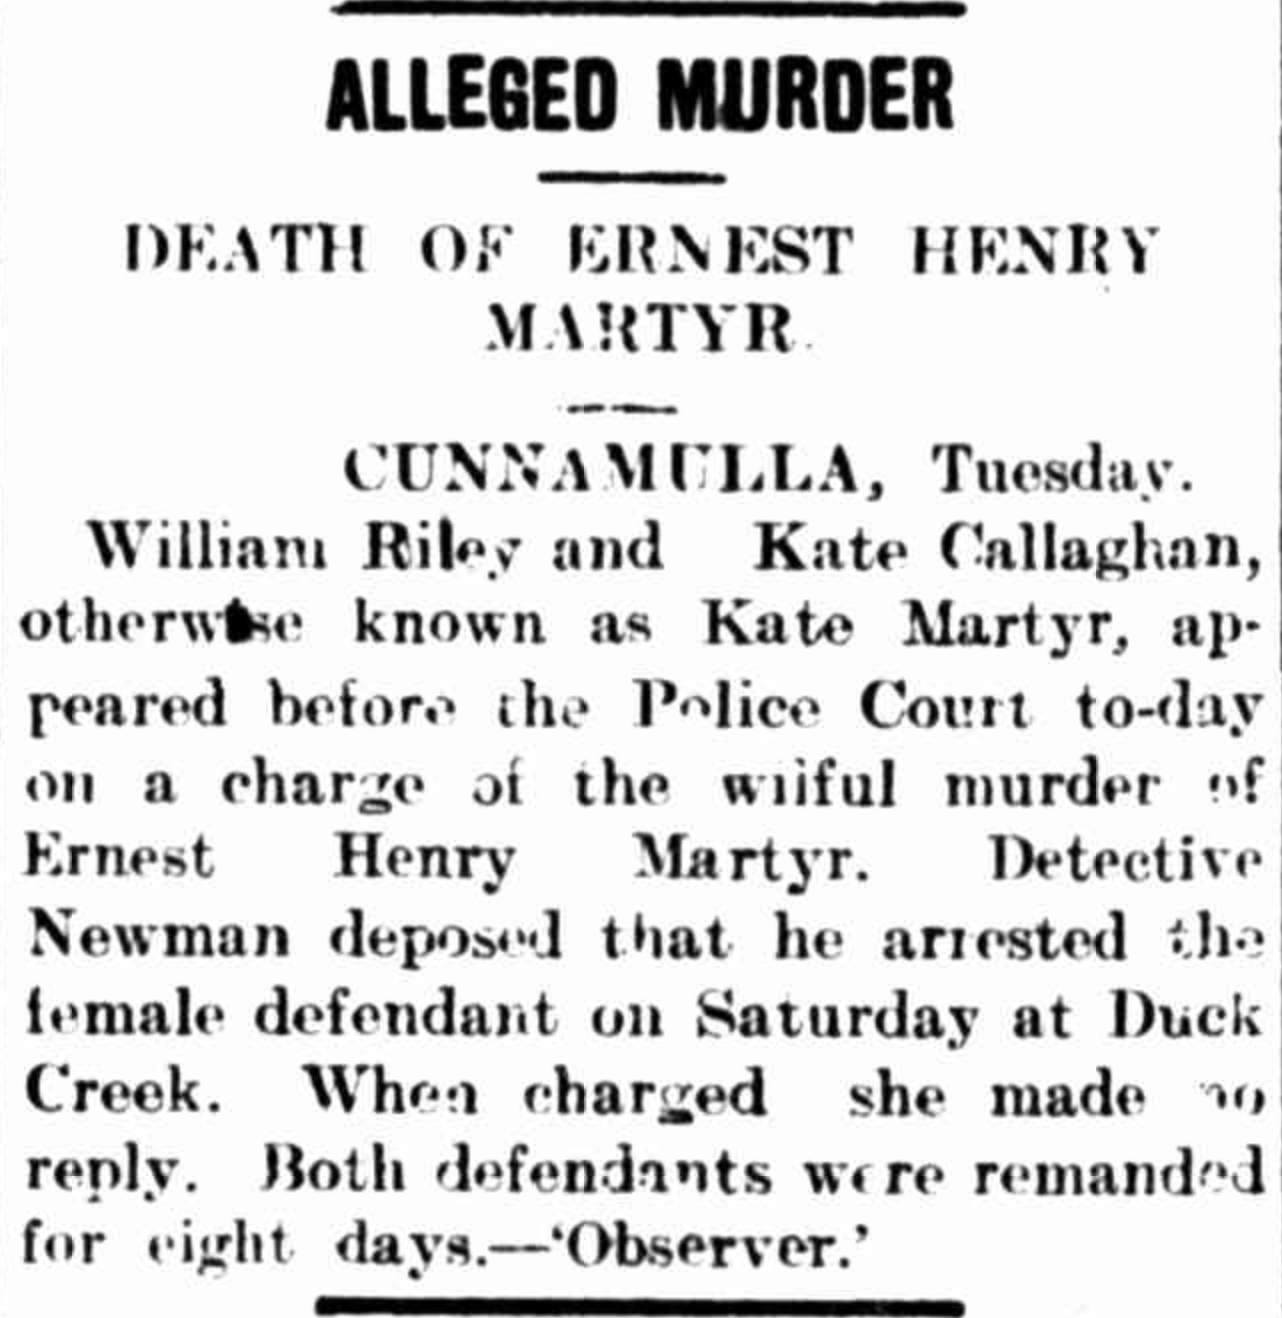 Newspaper article with the title Alleged Murder